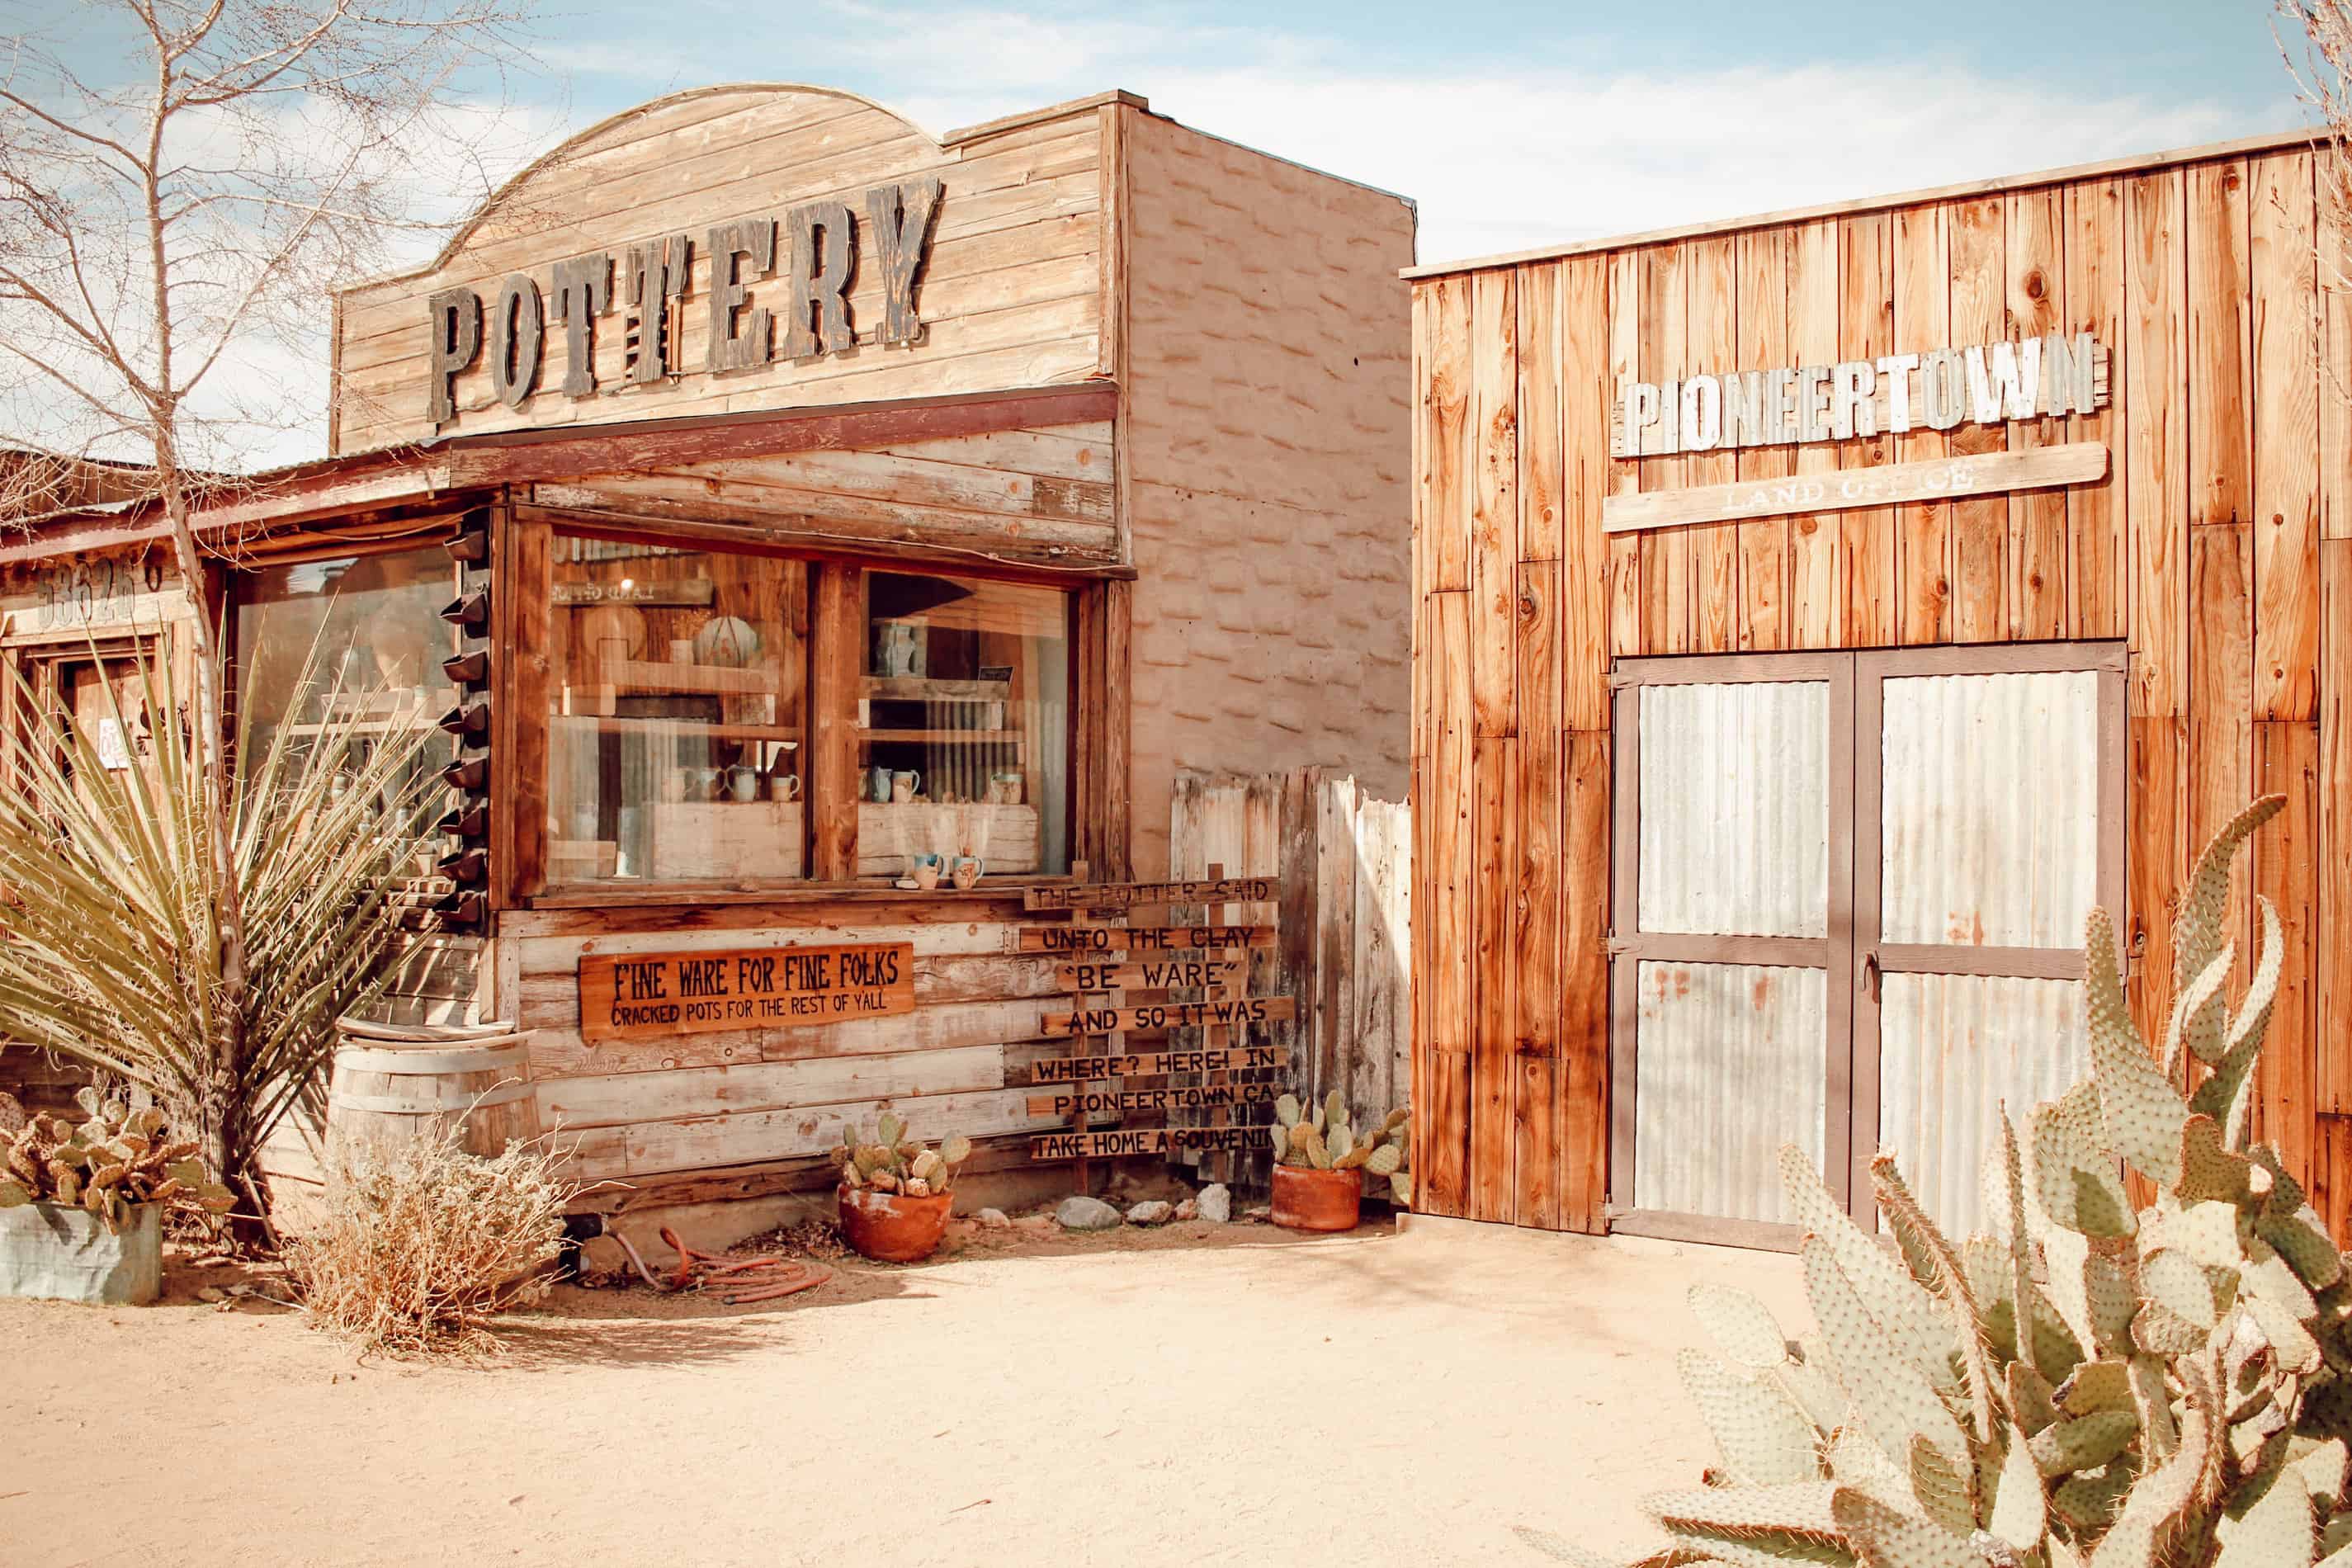 pottery storefront in Pioneertown California